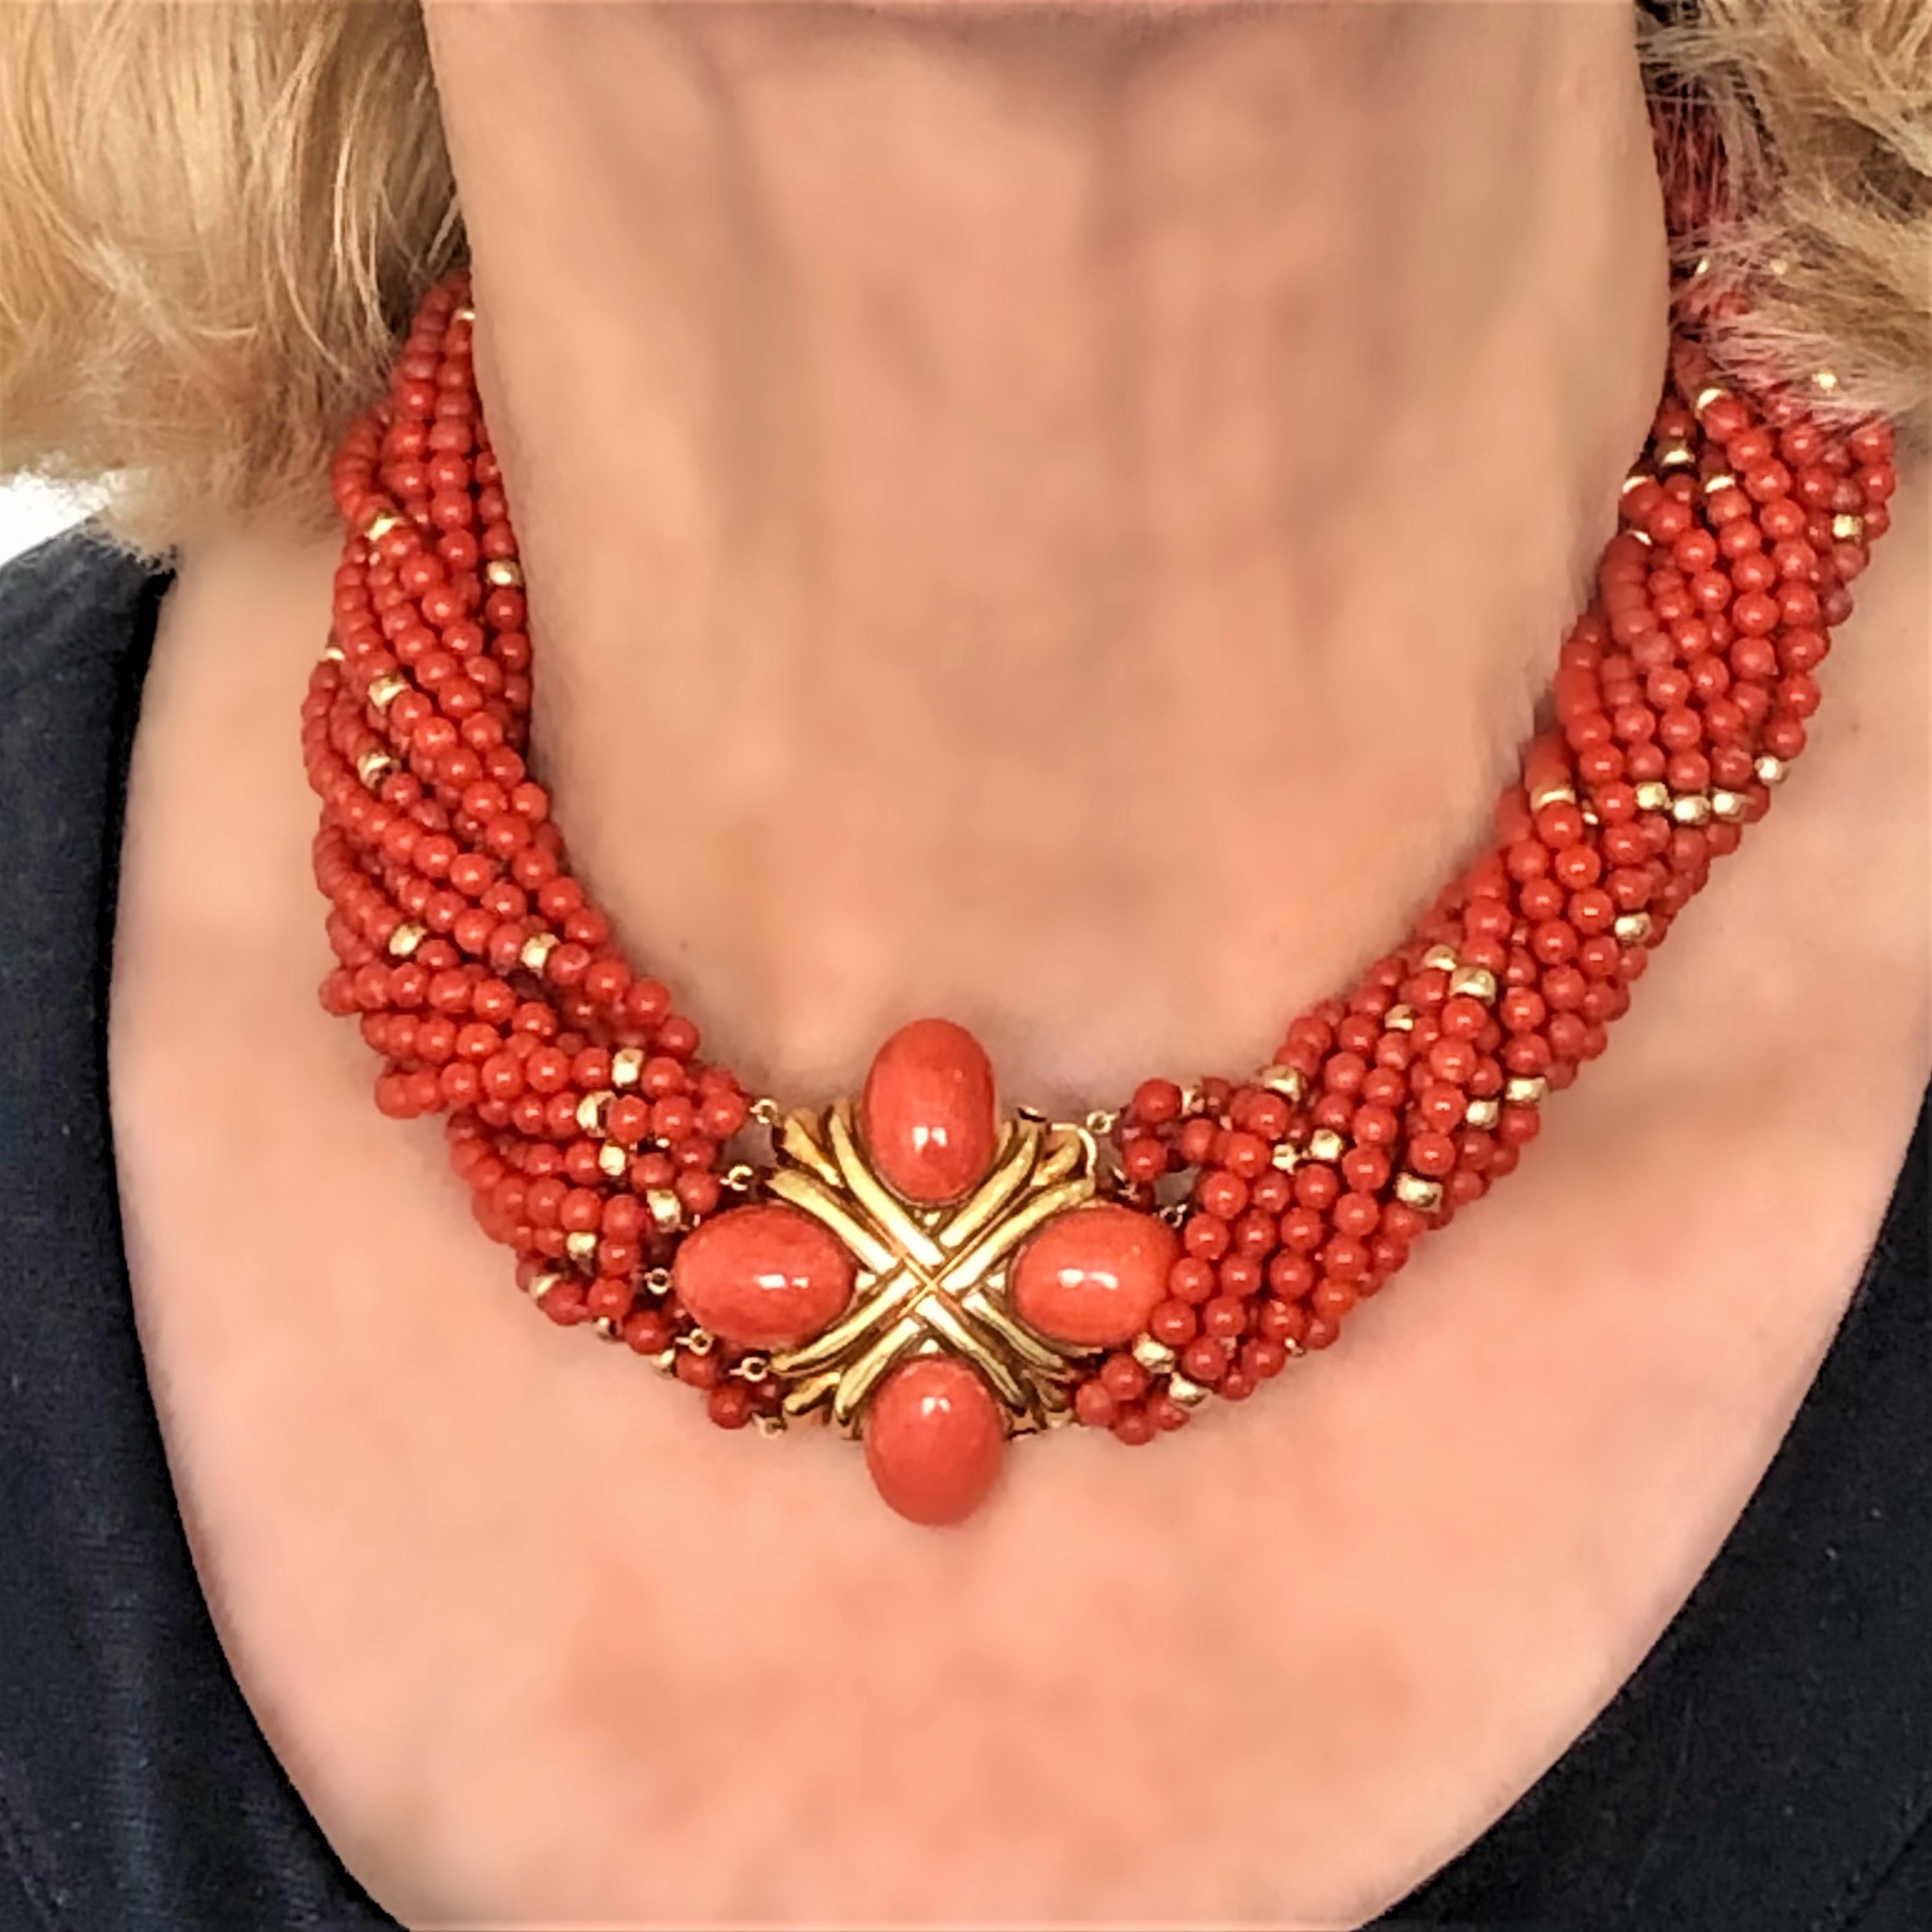 Women's Luxurious Choker Length Gold and Vivid Orange Coral Torsade Necklace For Sale